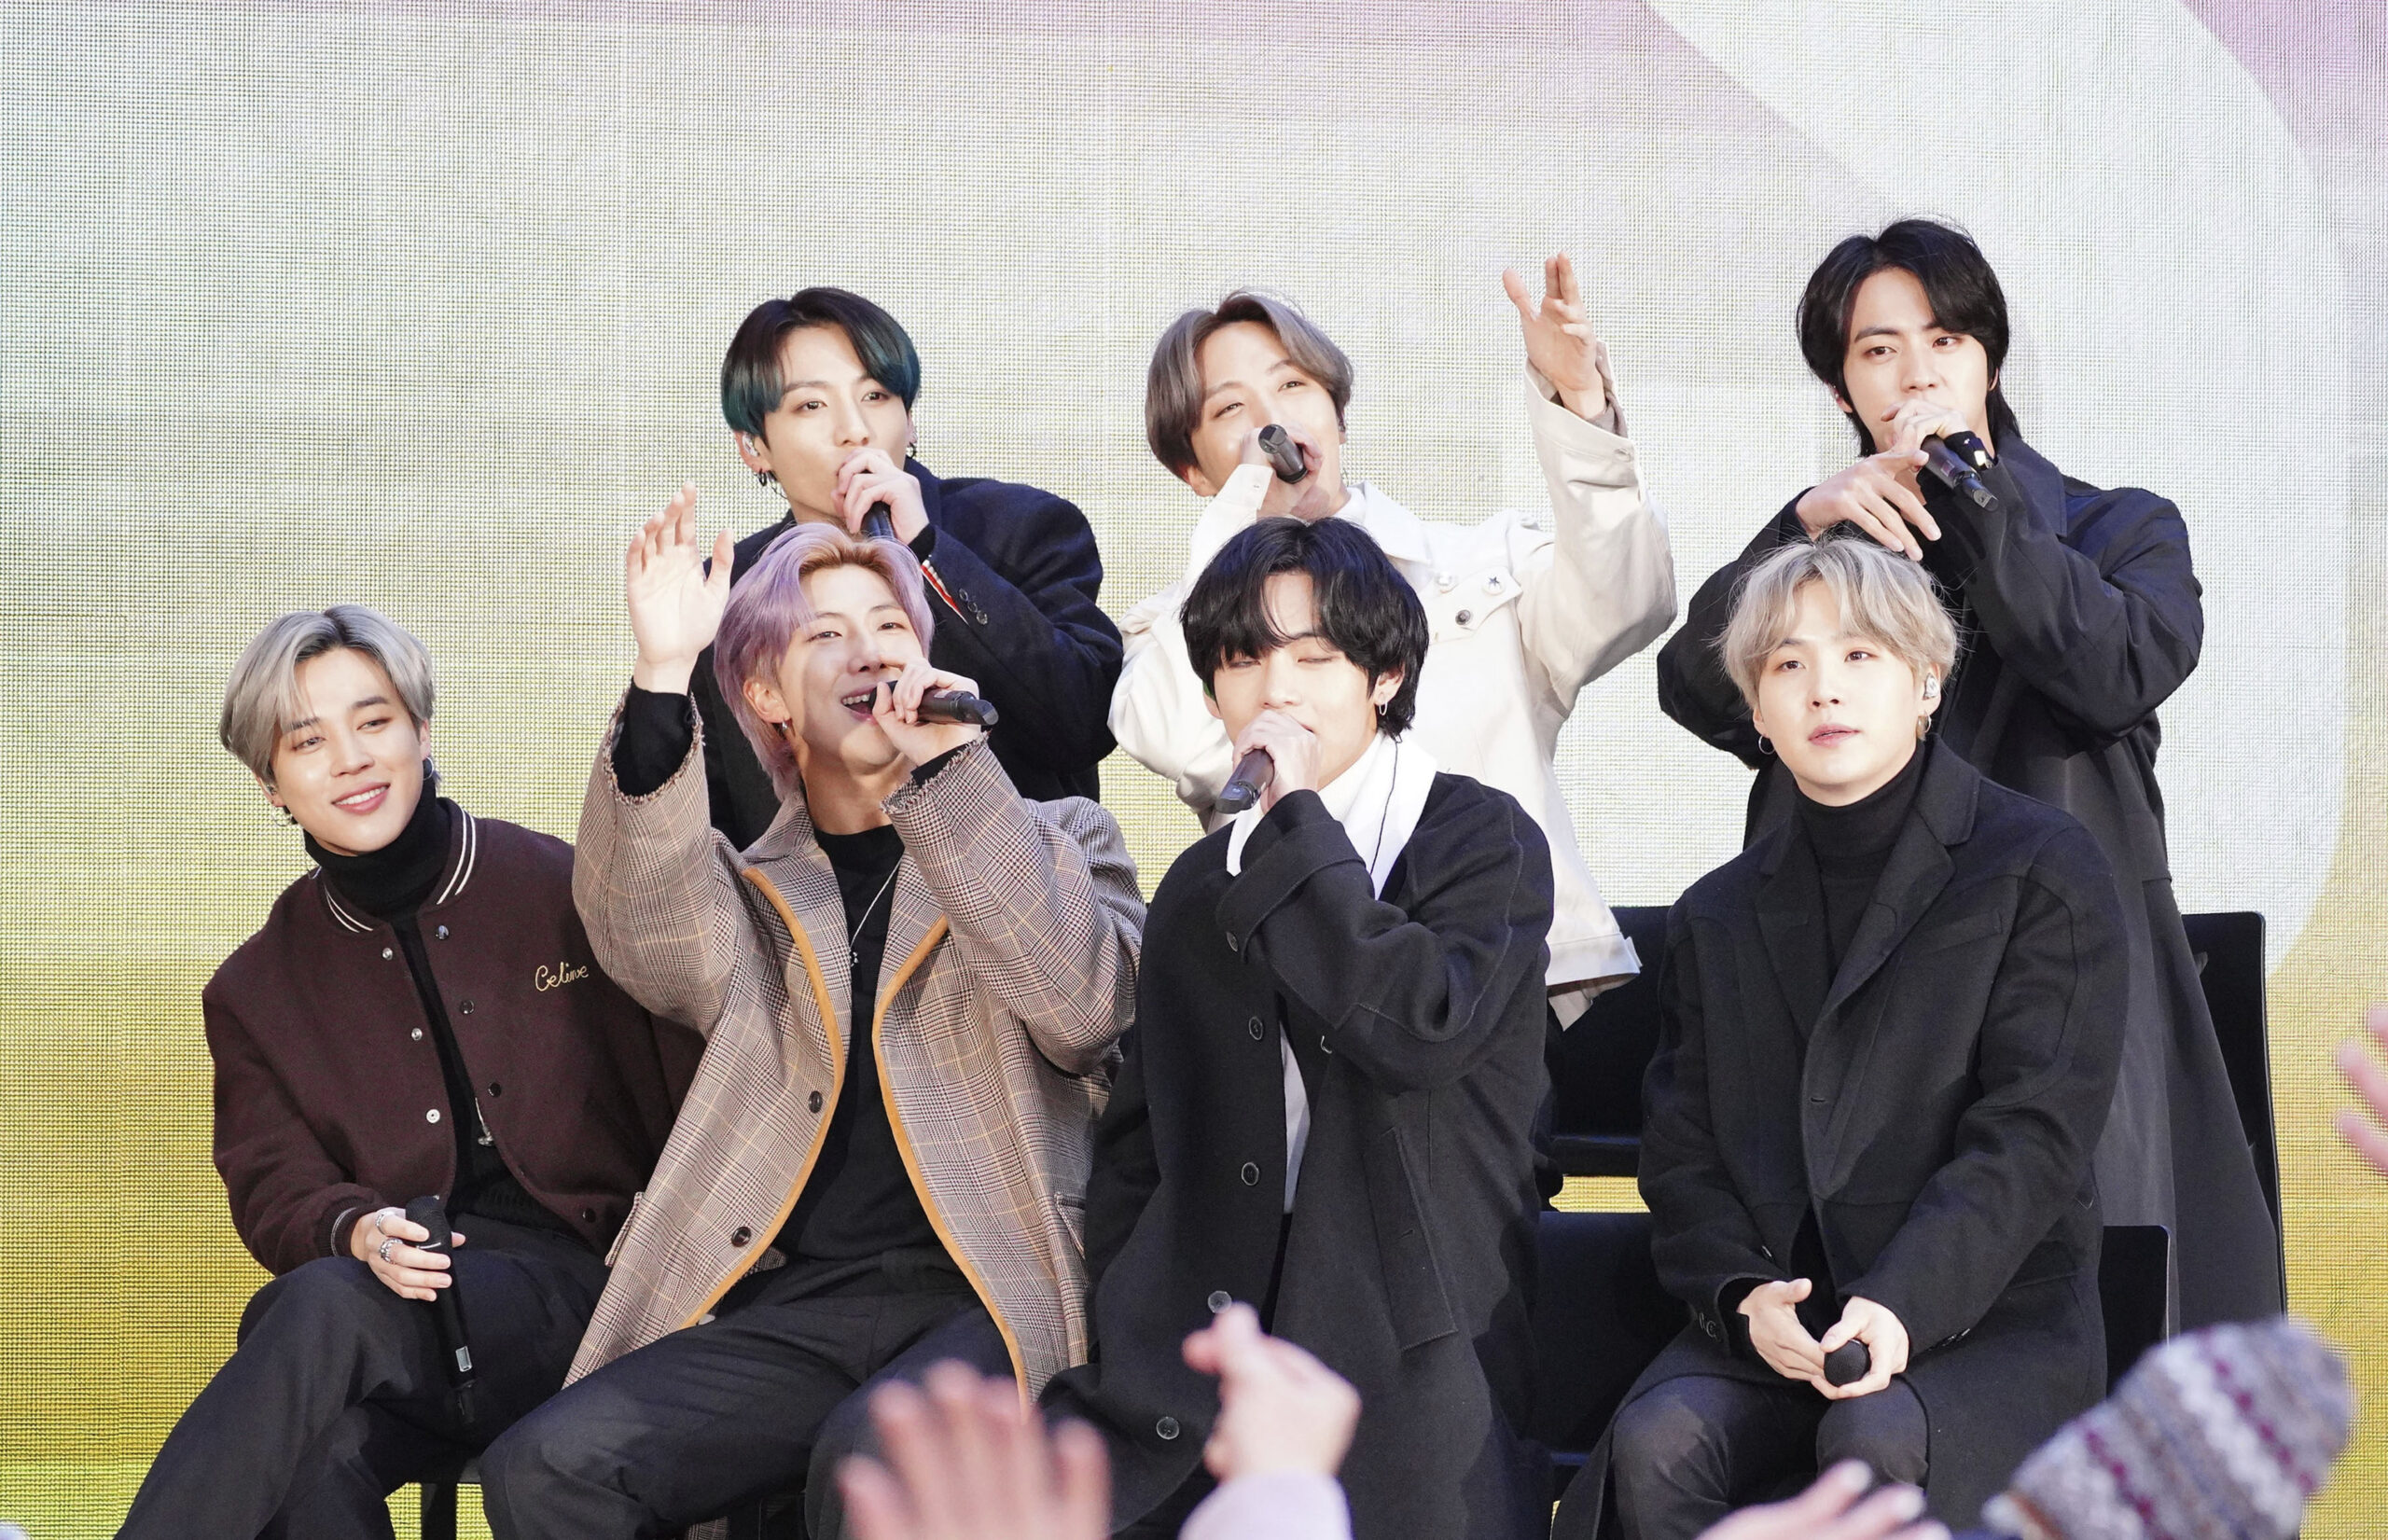 Photo by: zz/John Nacion/STAR MAX/IPx 2020 2/21/20 BTS - the South Korean K-Pop boy band comprised of members Jin, Suga, J-Hope, RM, Jimin, V and Jungkook - visit The Today Show on February 21, 2020 at Rockefeller Plaza in New York City. (NYC)